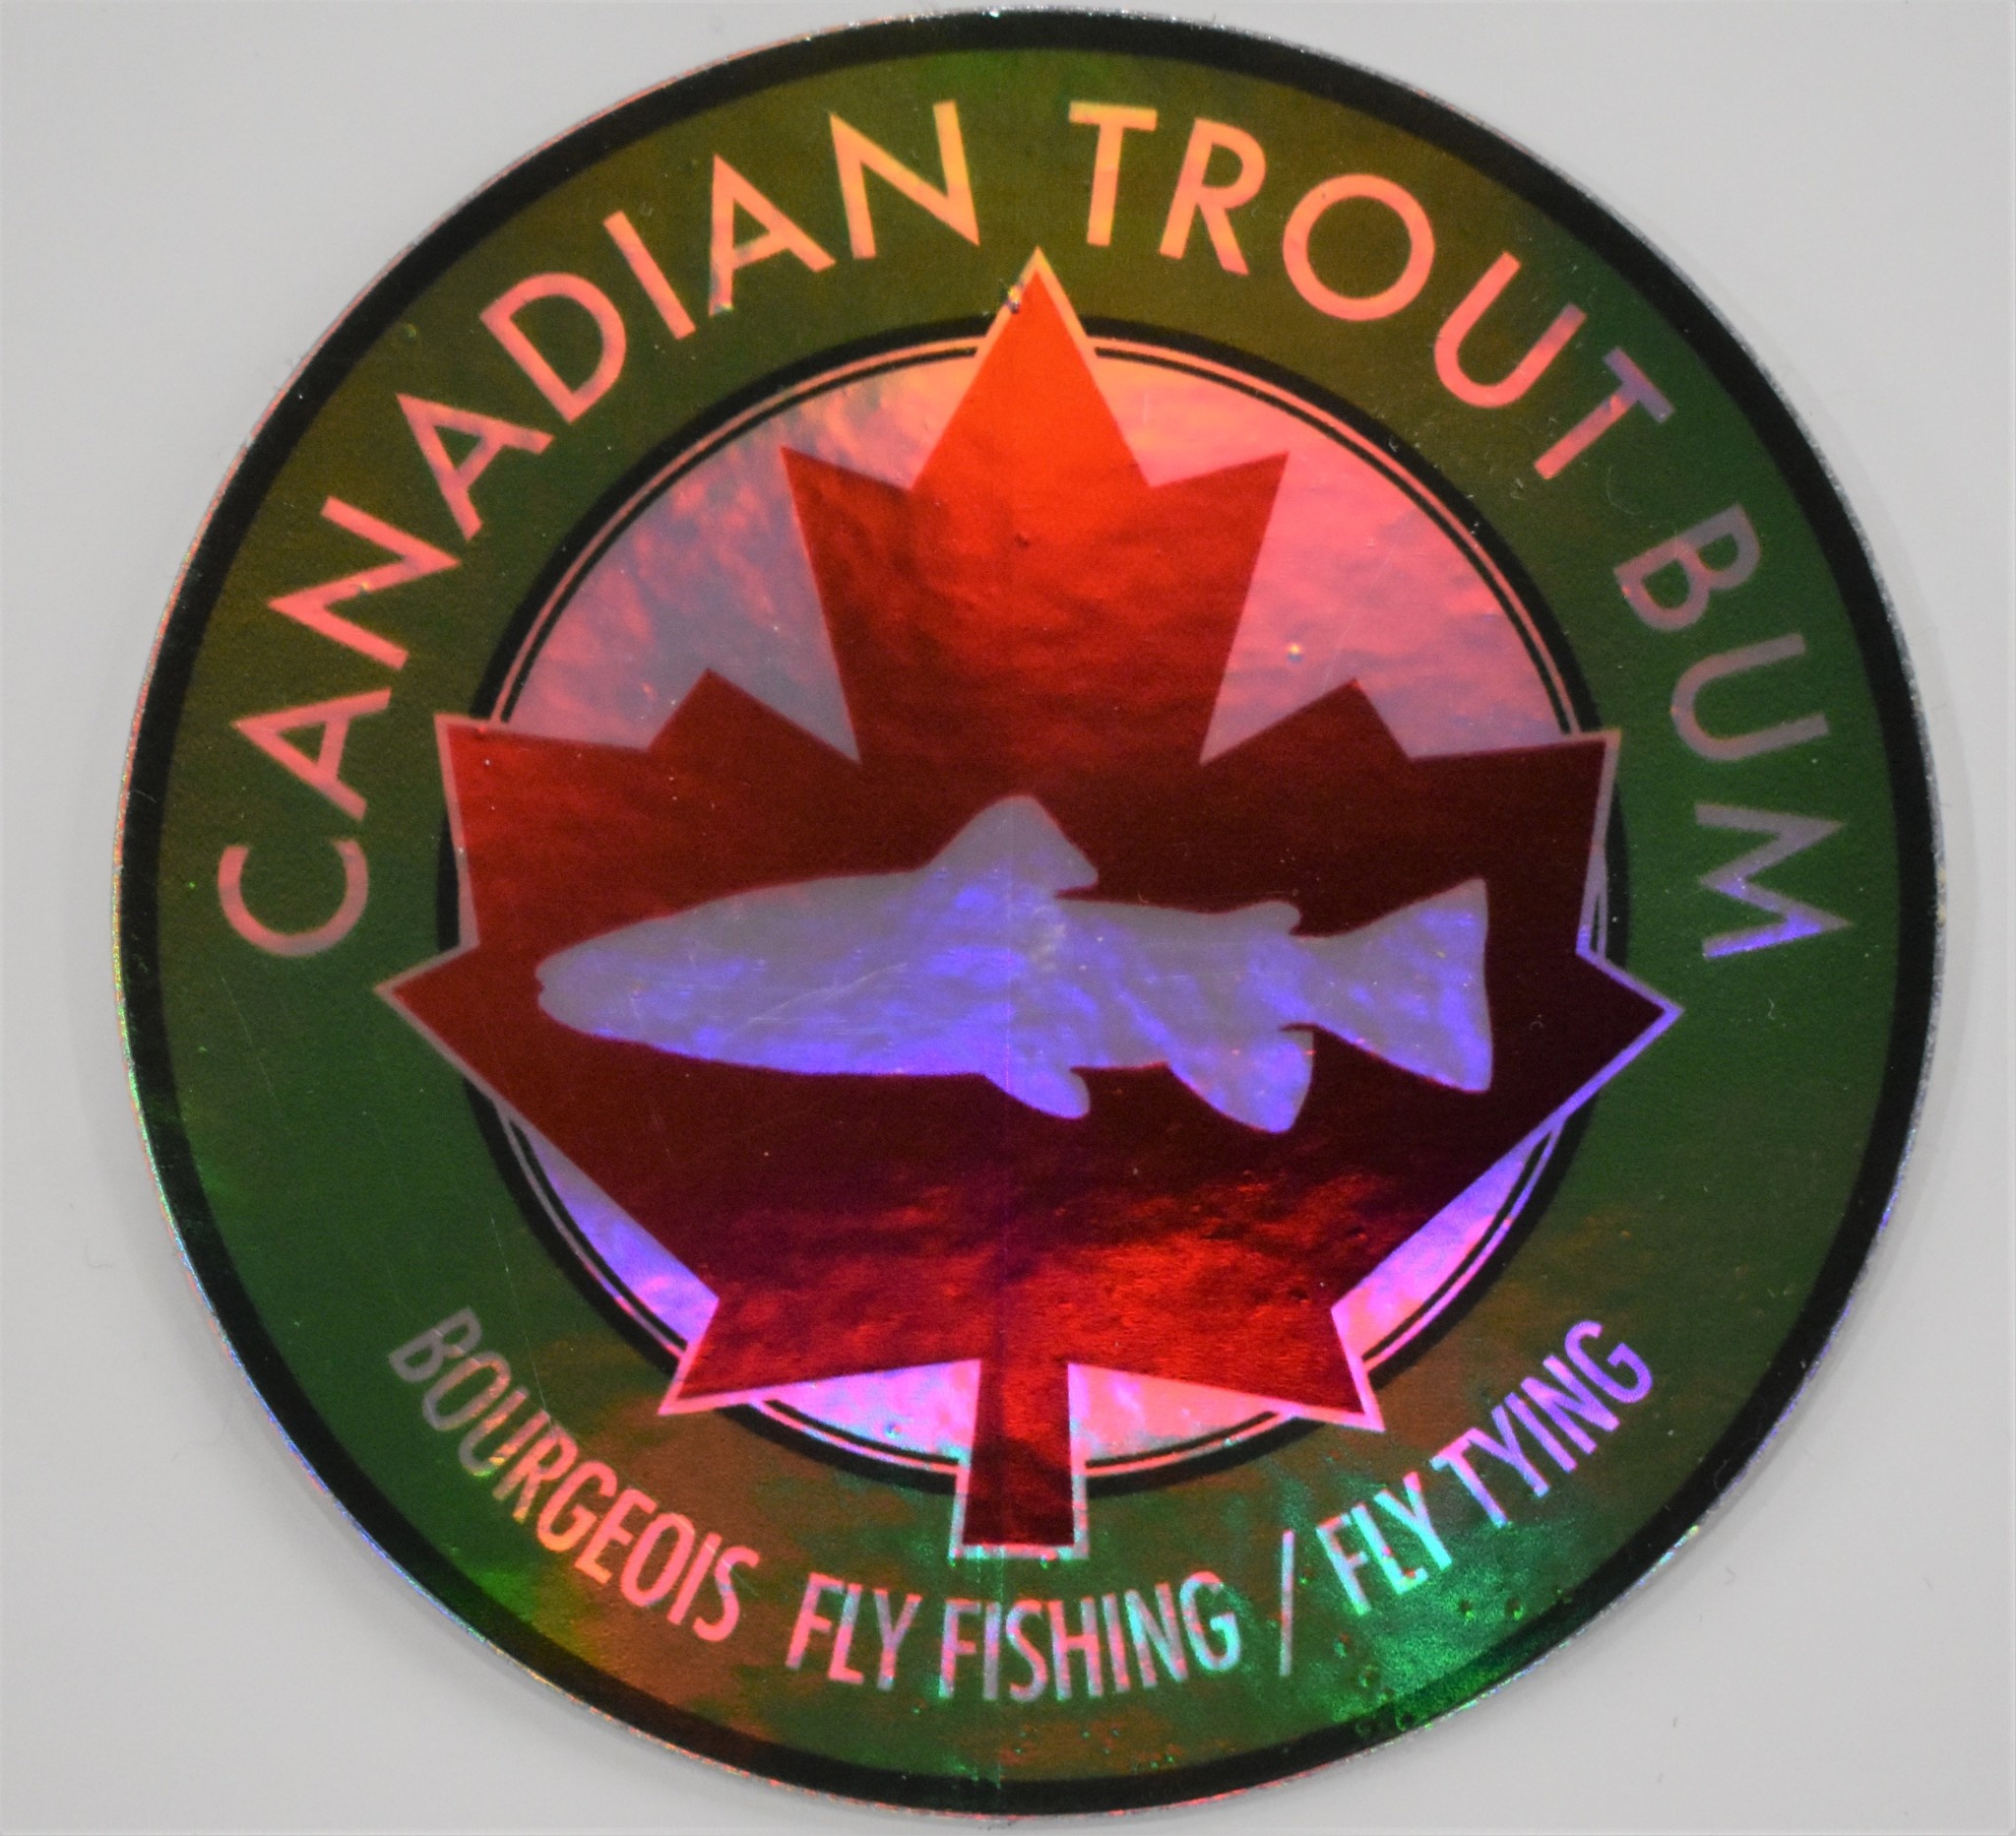 Canadian Trout Bum B Fly Fishing/Tying Circle Decal - Total Outfitters